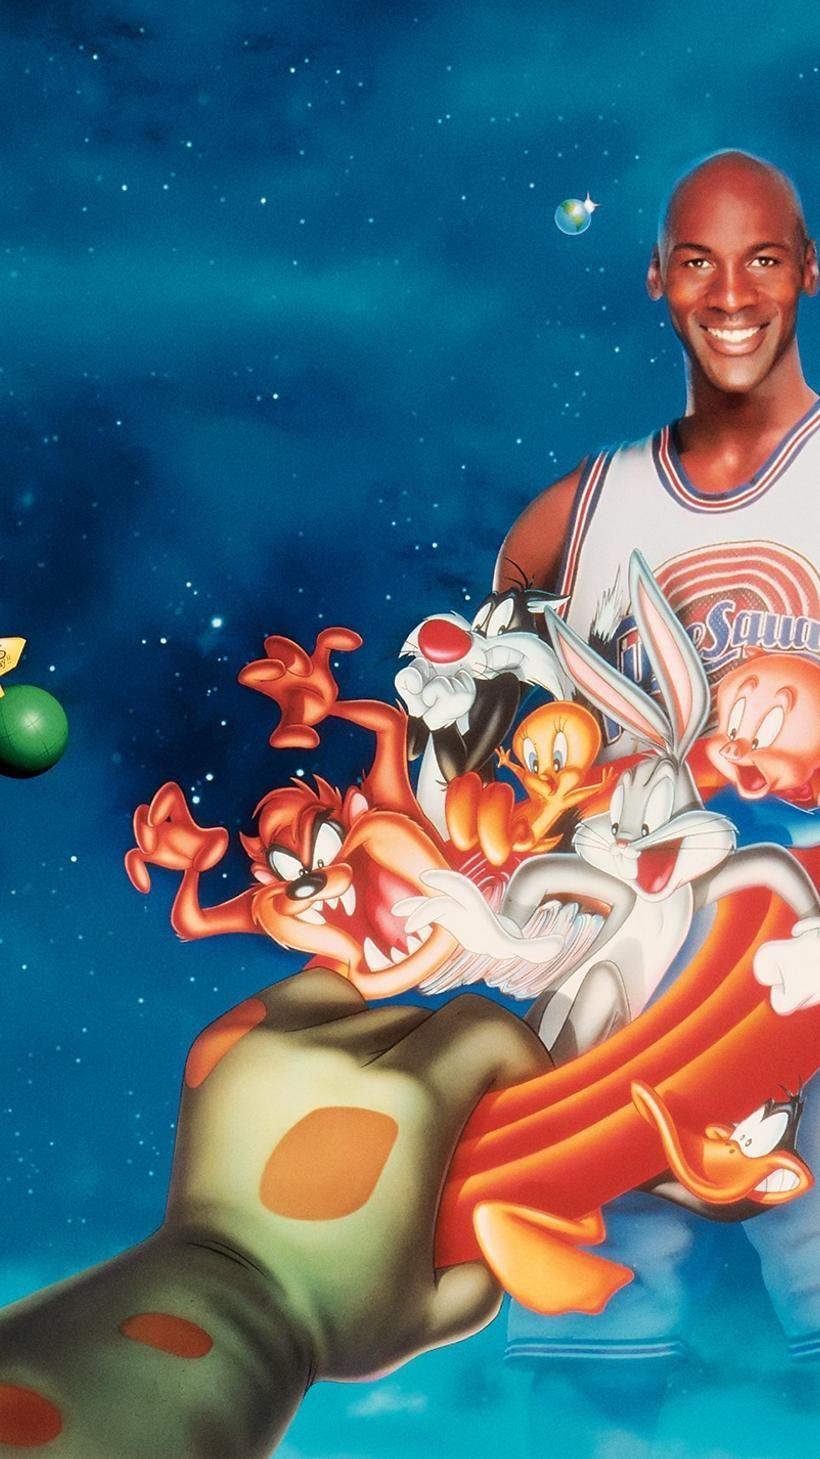 Space Jam 2 A New Legacy Movie Poster Wallpaper 4K 73520